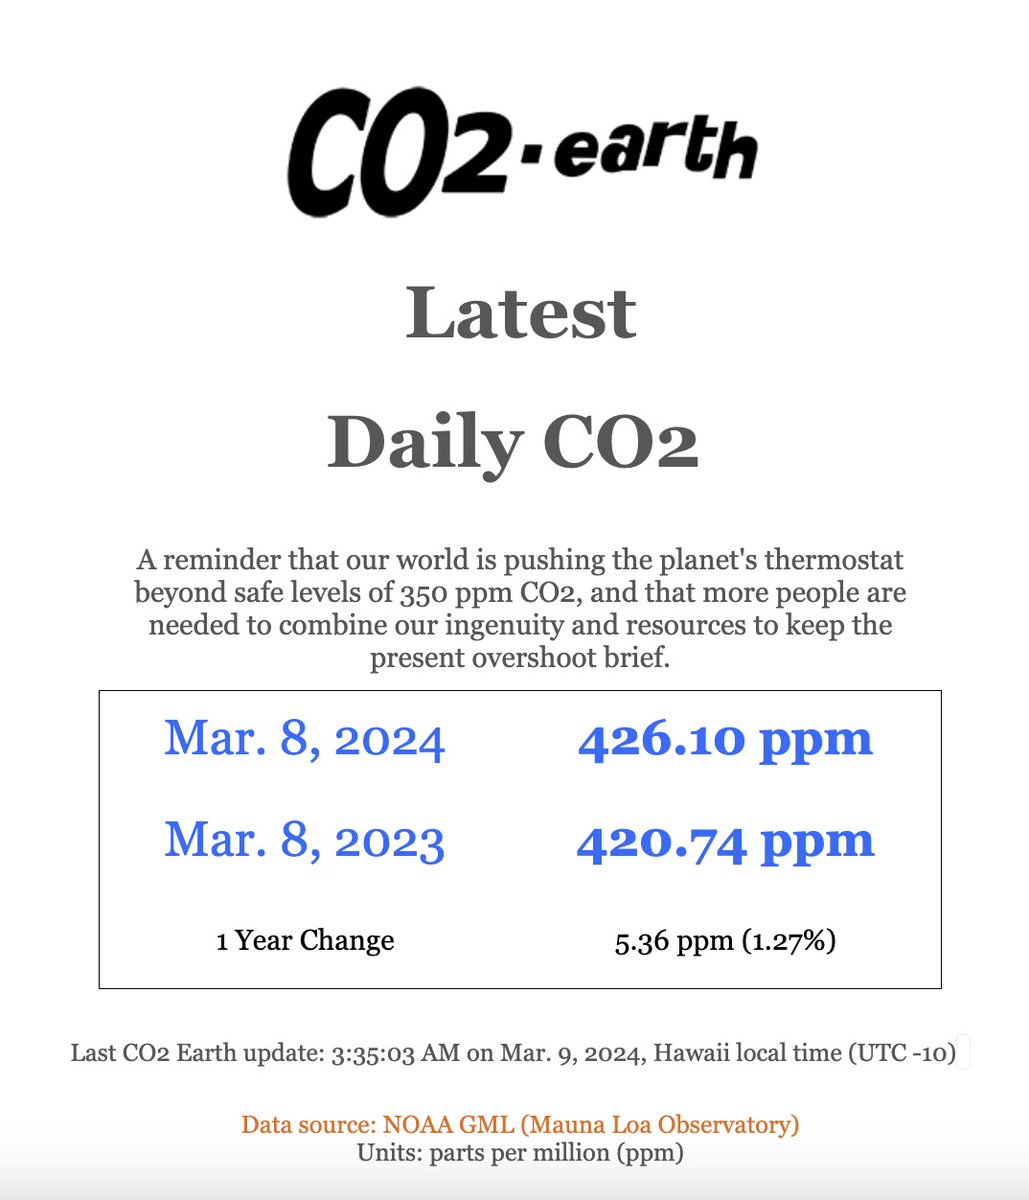 🌎📈 426.10 ppm #CO2 in the atmosphere on Mar. 8 2024 📈 Up 5.36 from 420.74 ppm one year ago 📈🌎 @NOAA Mauna Loa data: gml.noaa.gov/ccgg/trends/mo… 🌎 CO2.Earth Daily: co2.earth/daily-co2 🌎🙏 Pls. help make this global sustainability # visible 🙏